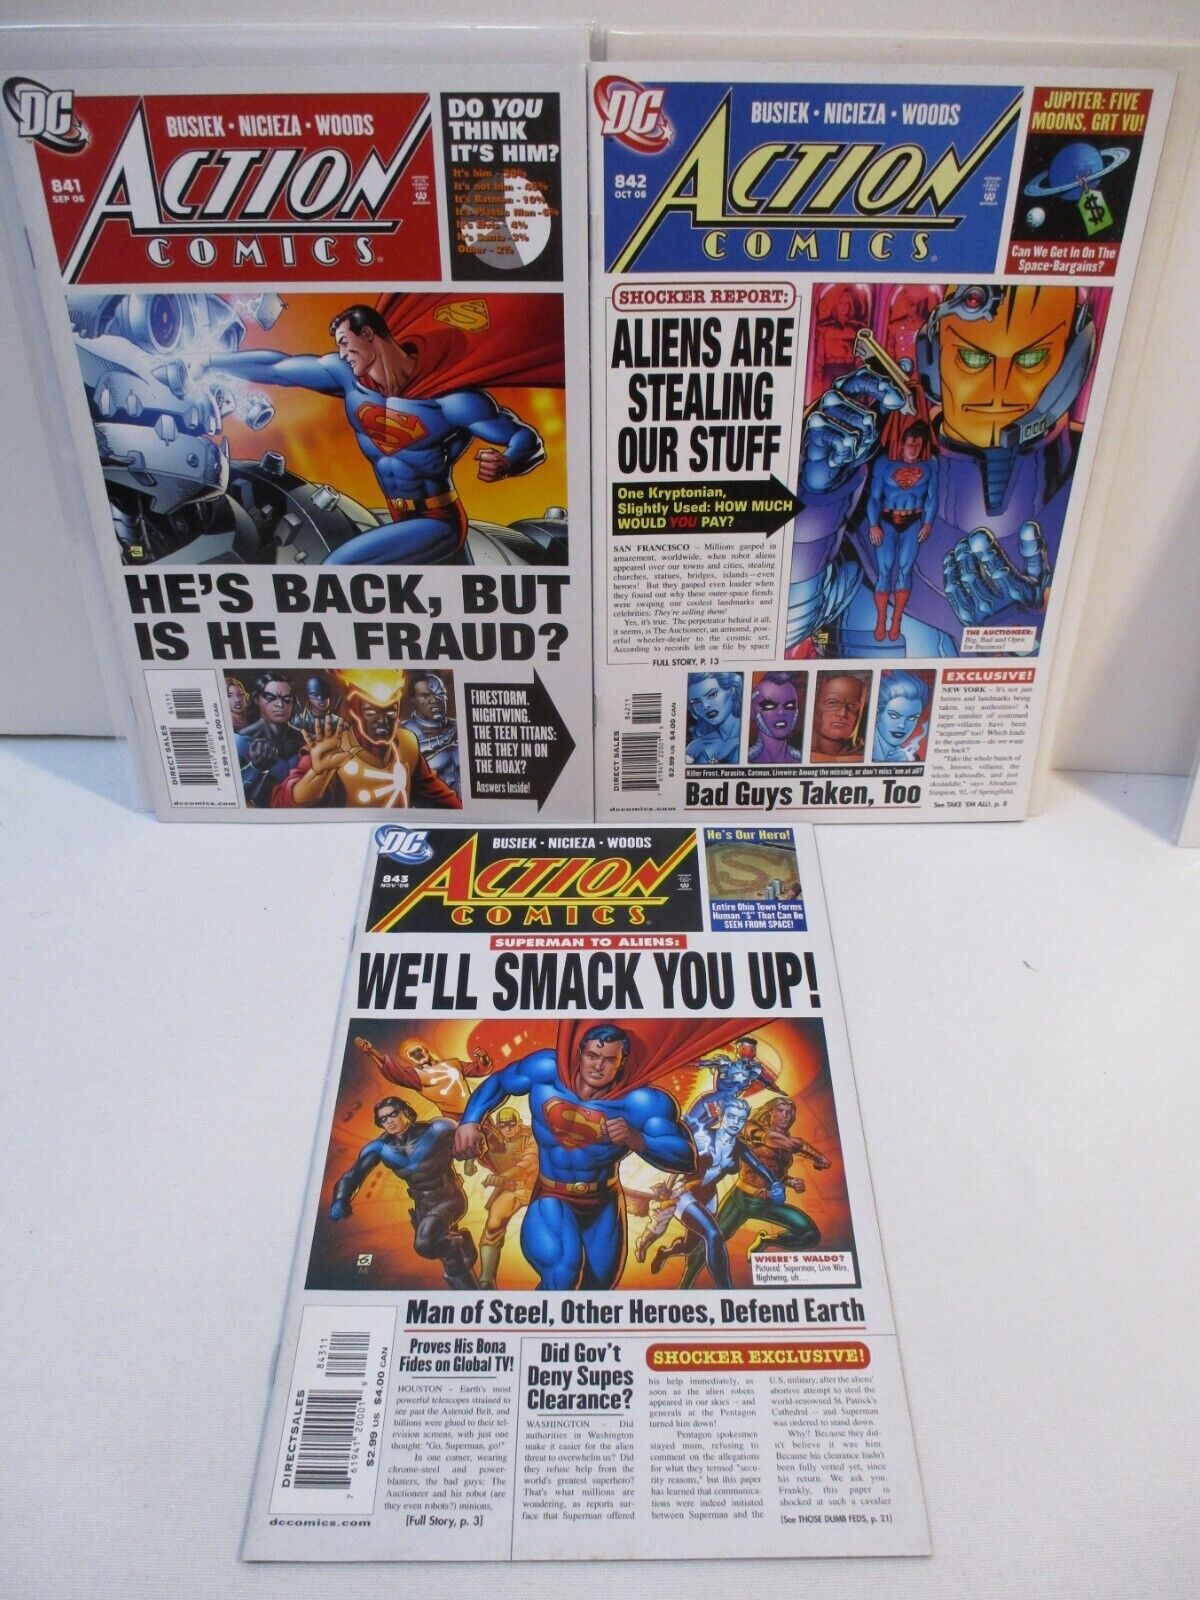 Action Comics 841, 842, 843 Back in Action - DC Comics 2006